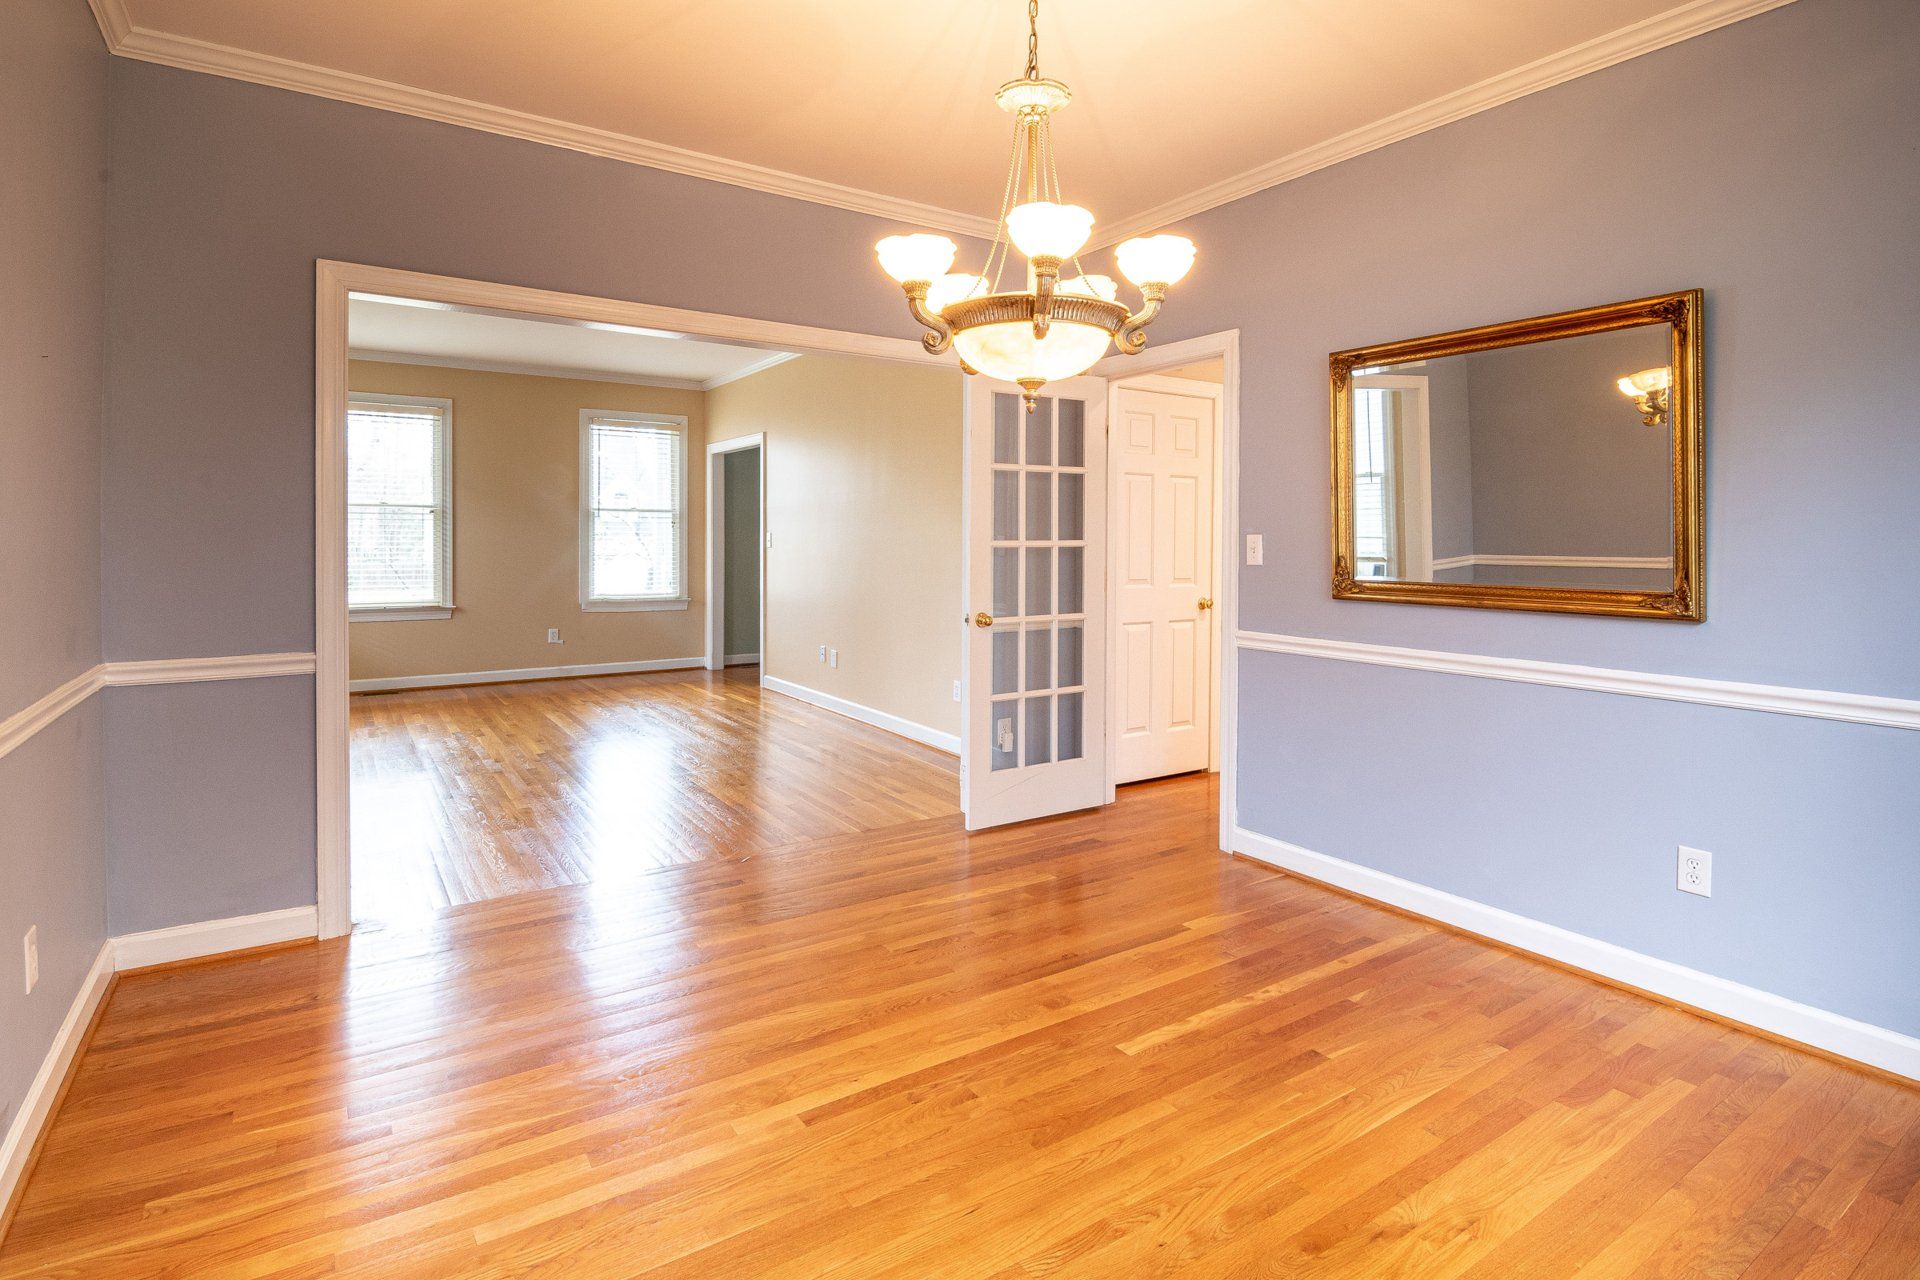 Bolton, MA home with refinished hardwood floors